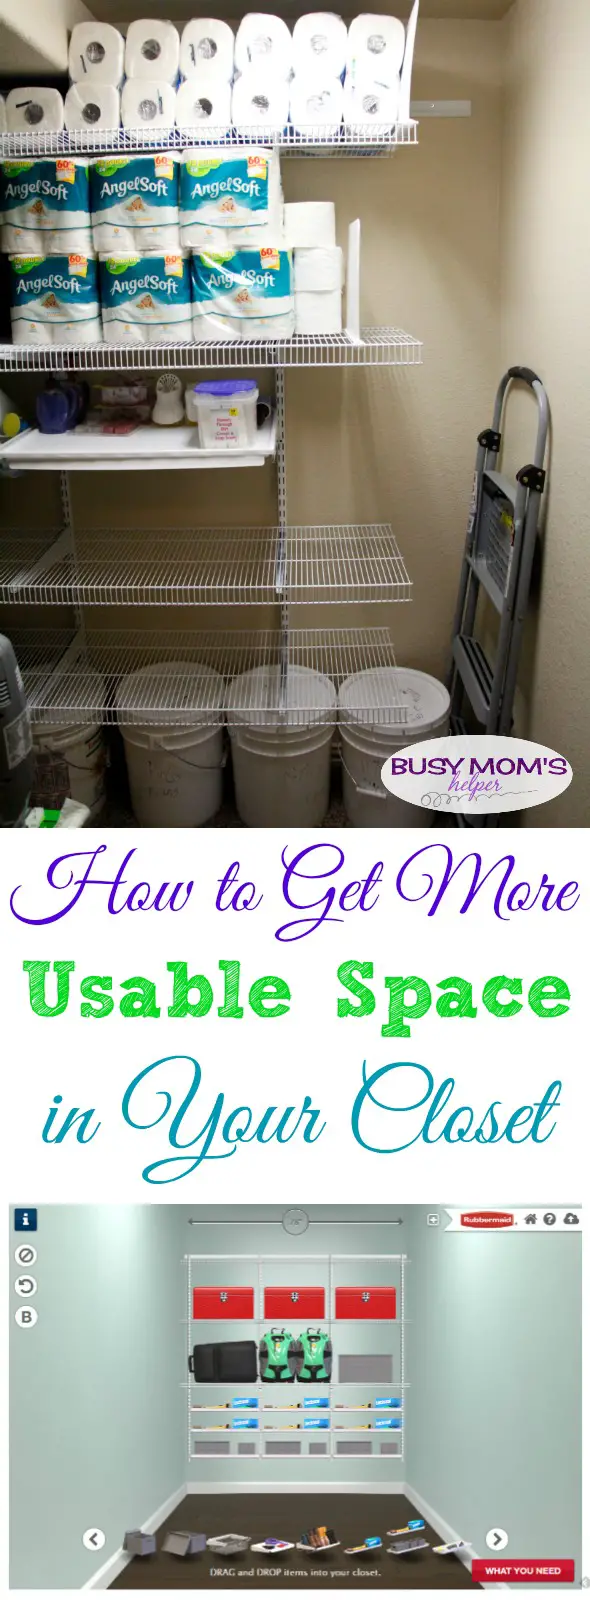 How to get More Usable Space in Your Closet #ad #WinterizeYourClosets